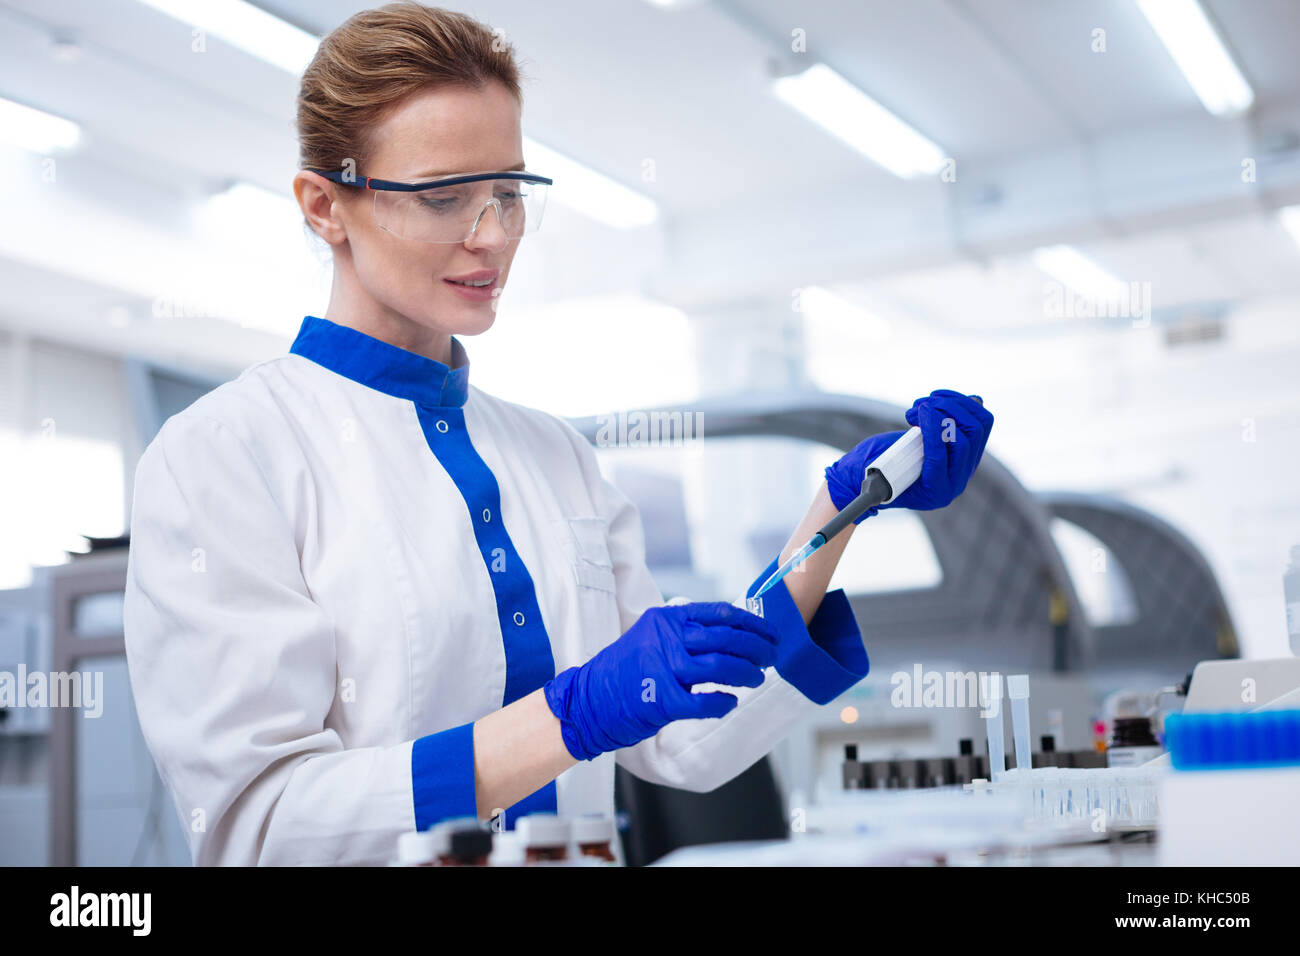 Calm concentrated scientist adding chemical Stock Photo